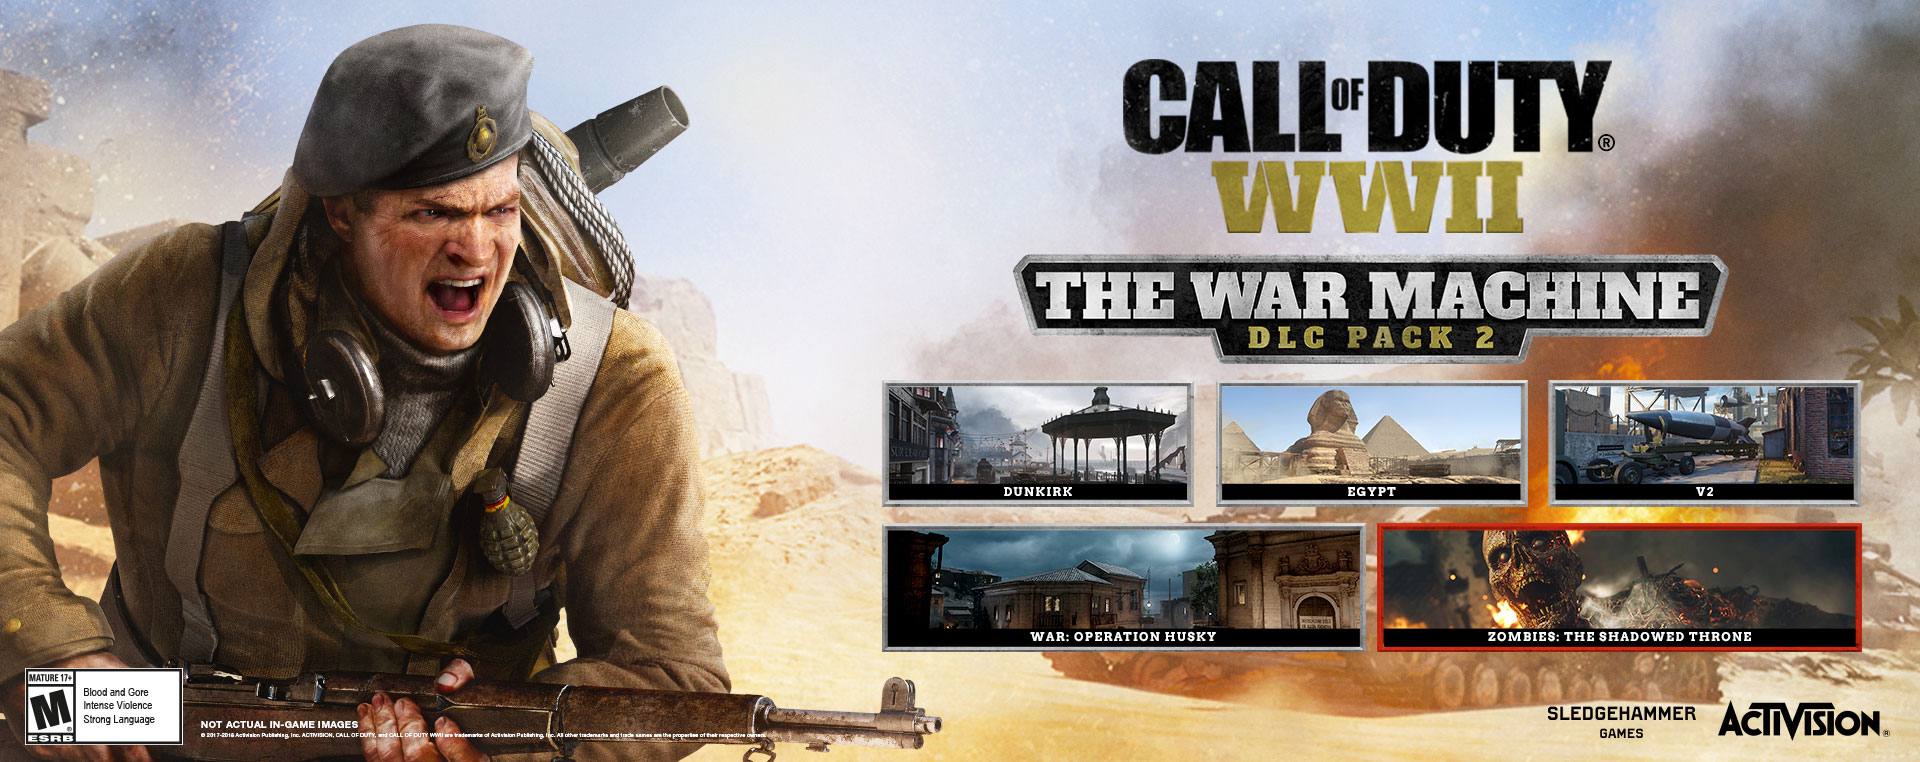 Prepare yourself for Call of Duty: WWII - The War Machine – the Second DLC  Pack for Call of Duty: WWII!